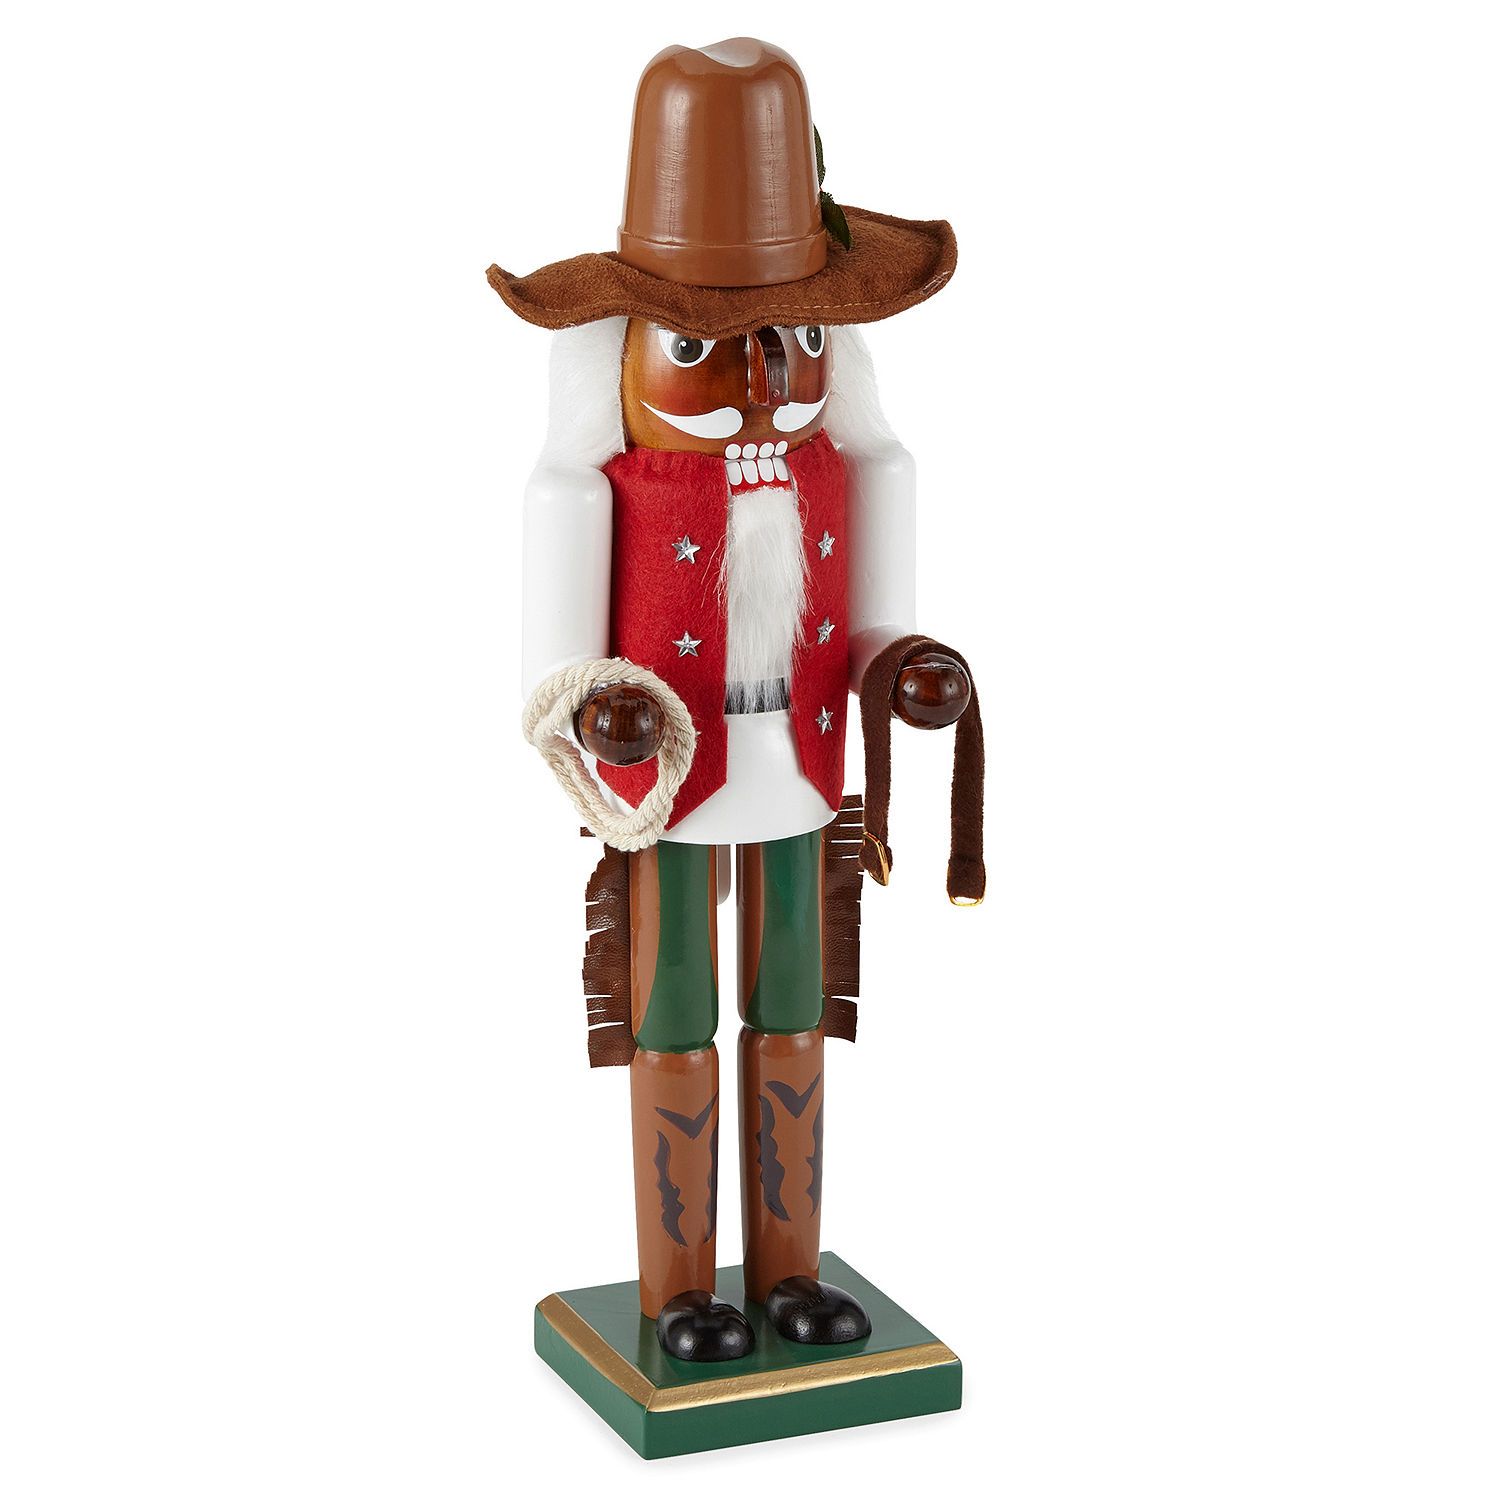 North Pole Trading Co. 14" African American Cowboy Christmas Nutcracker | JCPenney